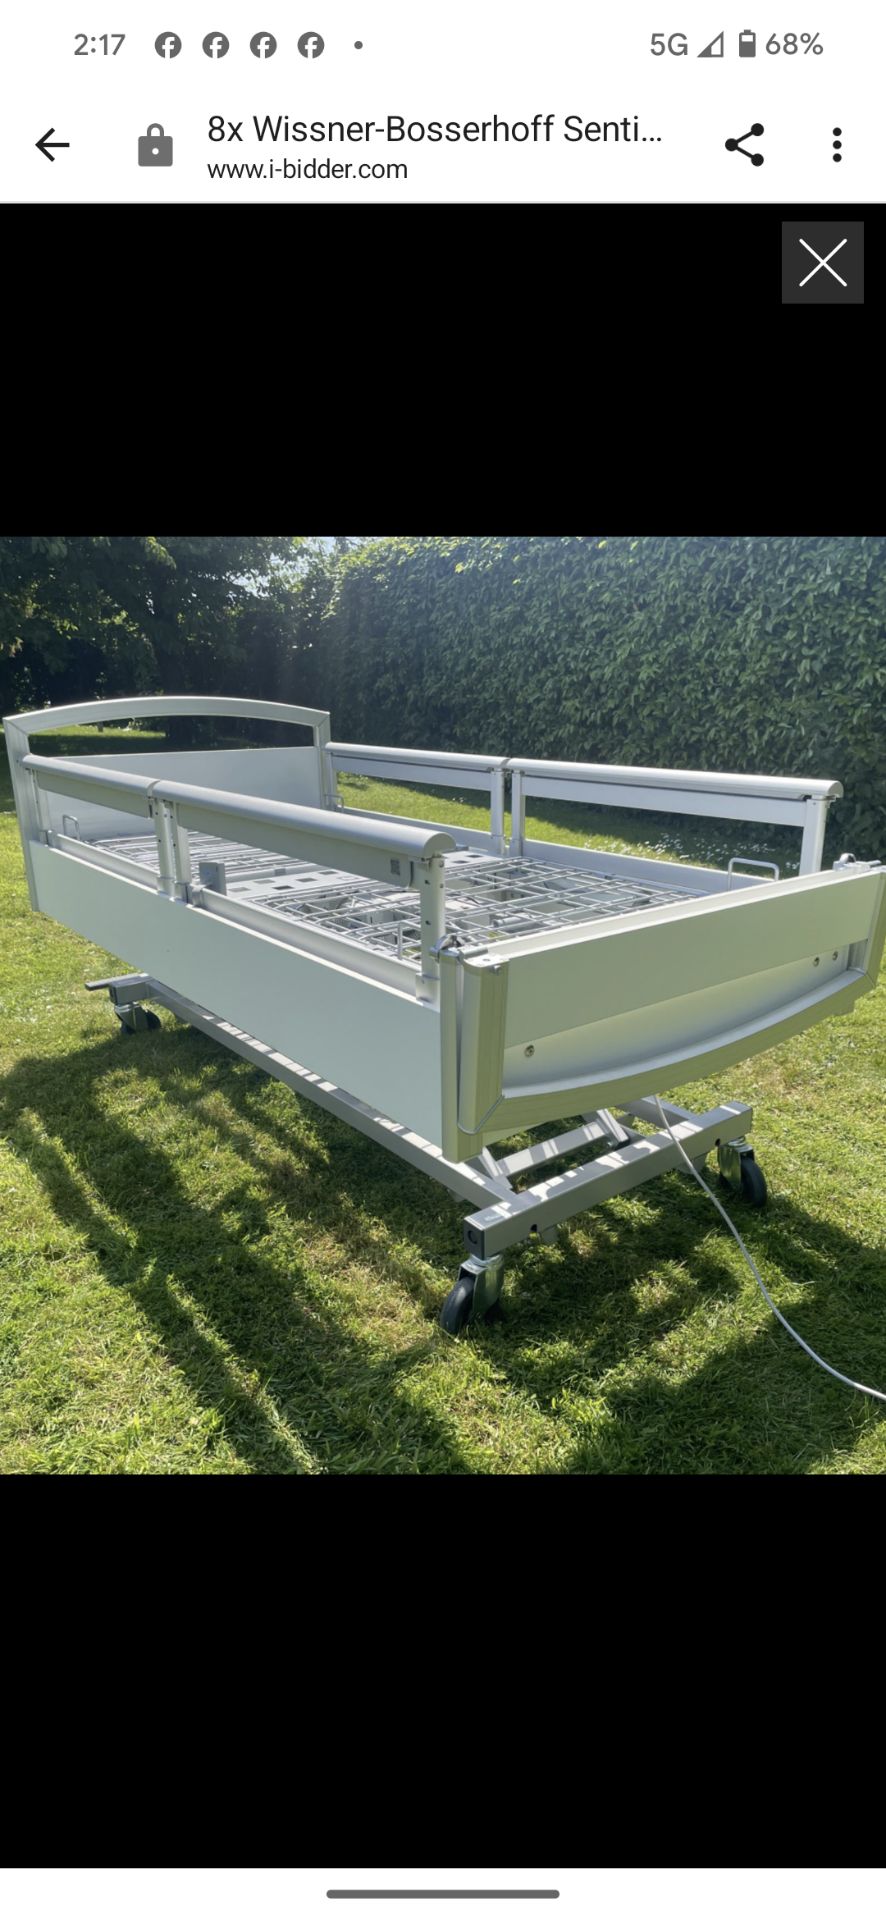 4 x Wissner Bosserhof Sentida 6 Electric Fully Adjustable Hospital Beds With Pressure Mattresses - Image 5 of 5